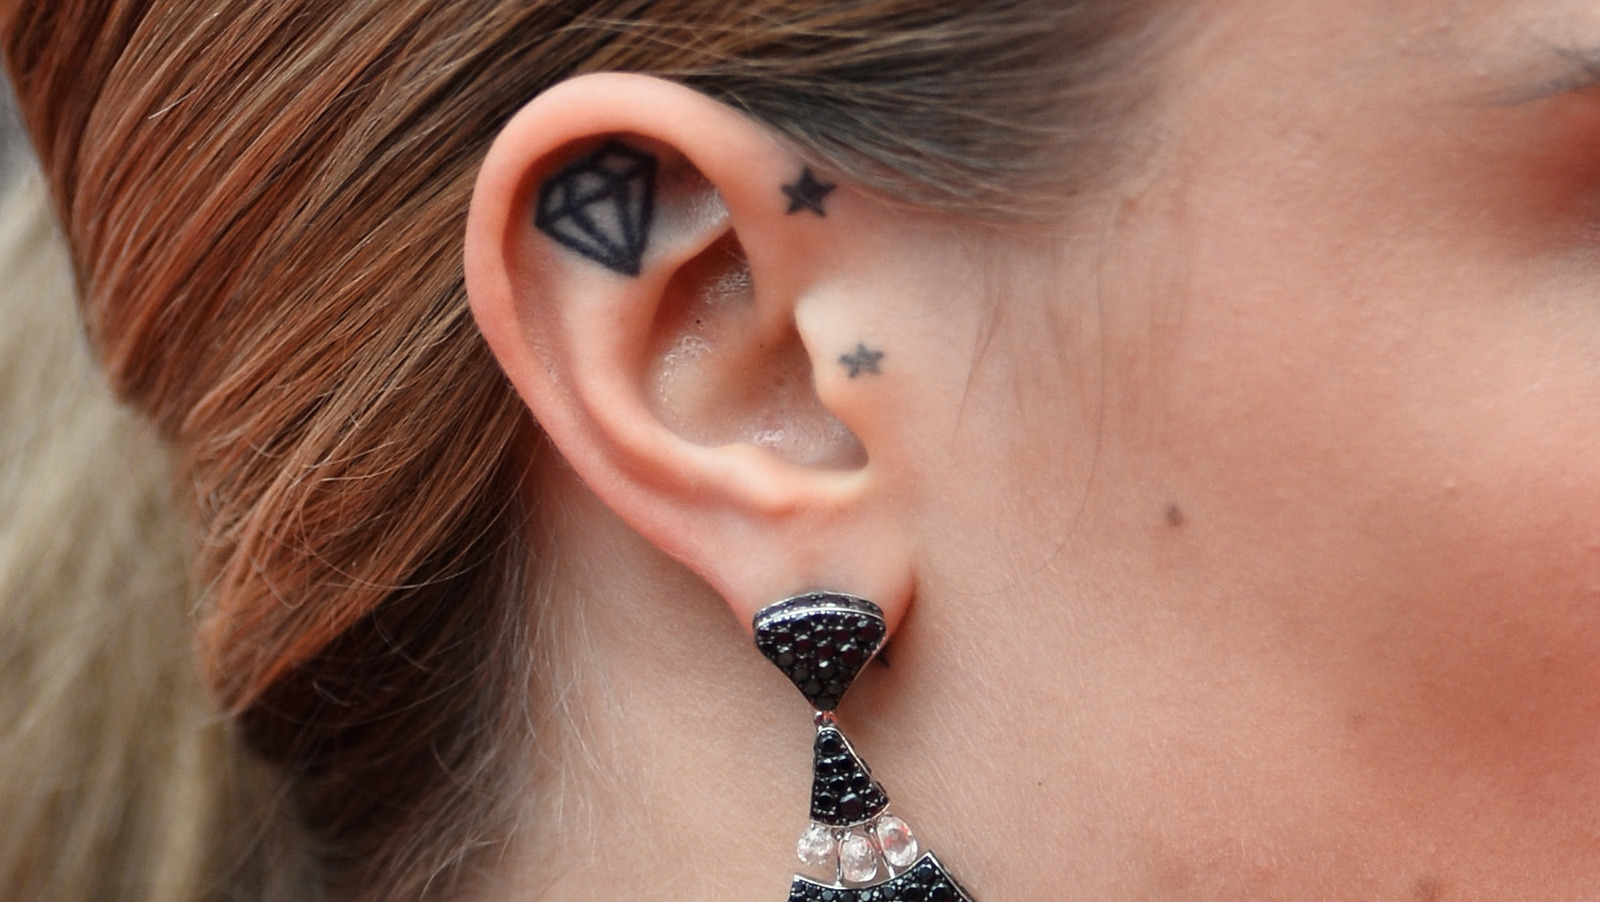 45 Ear Tattoo Ideas For Your Next Ink | Abstract tattoo designs, Subtle  tattoos, Line tattoos